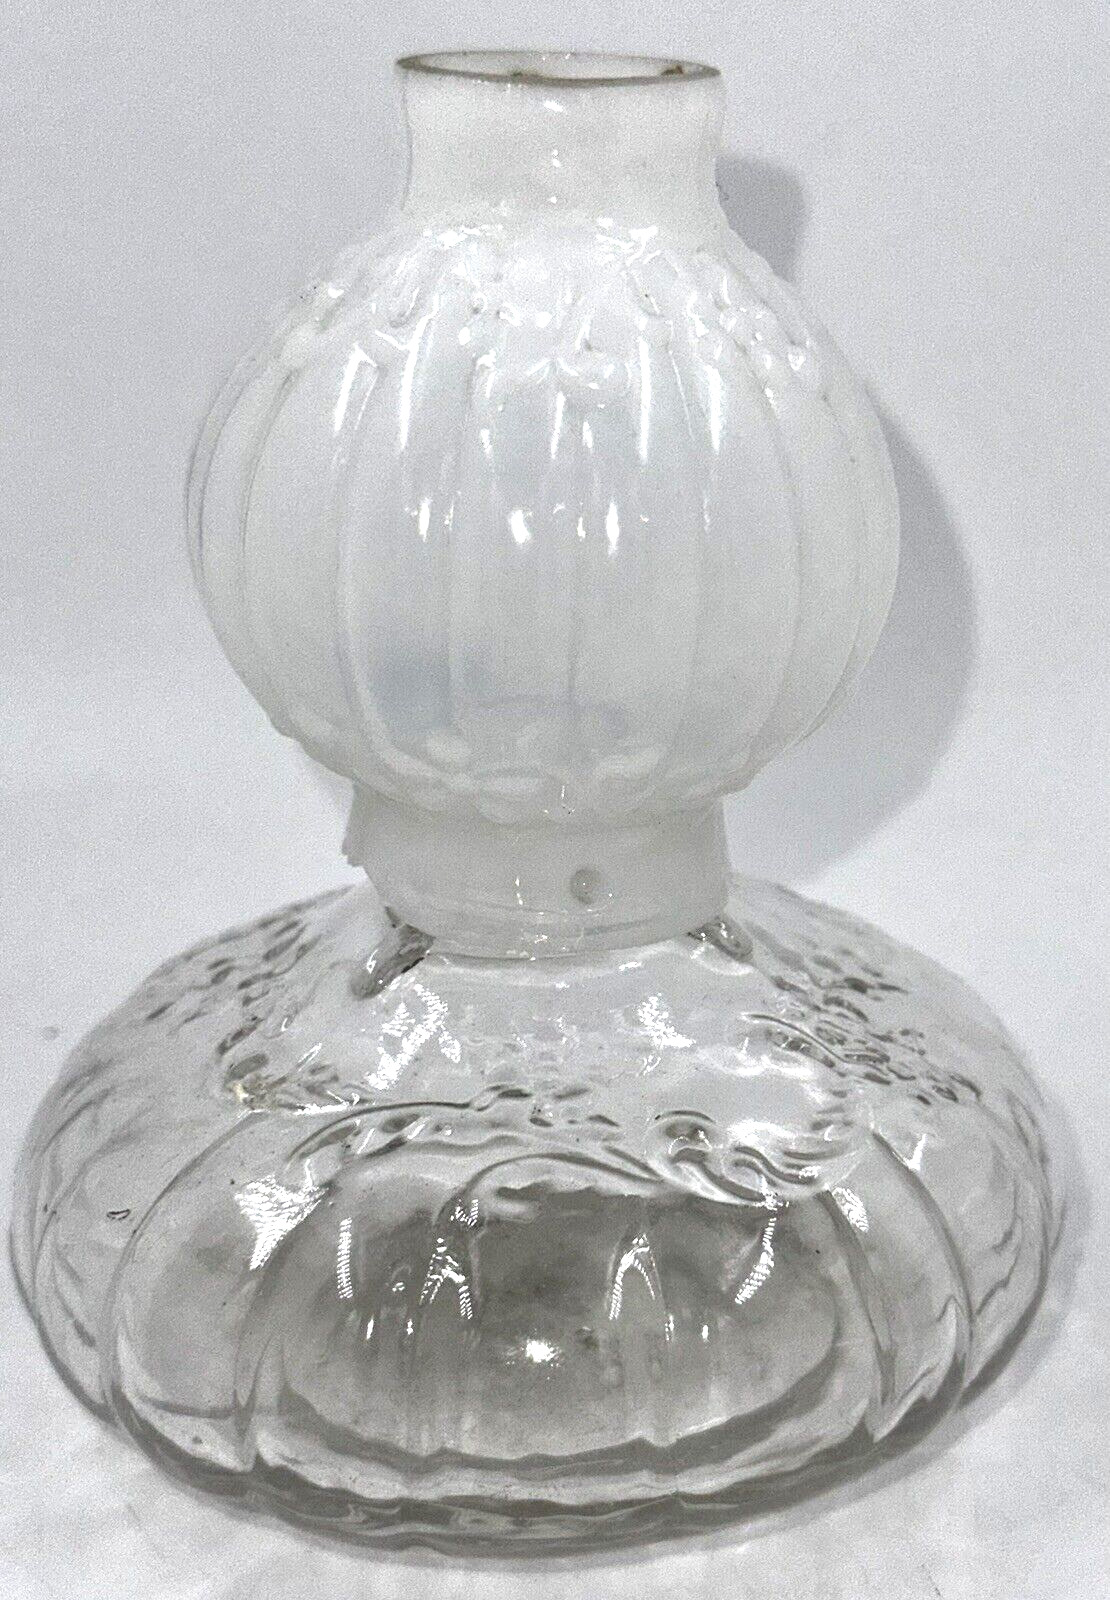 Antique GLOW NIGHT LAMP Pat'd Aug 27 1895 w/ Opalescent Glass Globe Made in USA